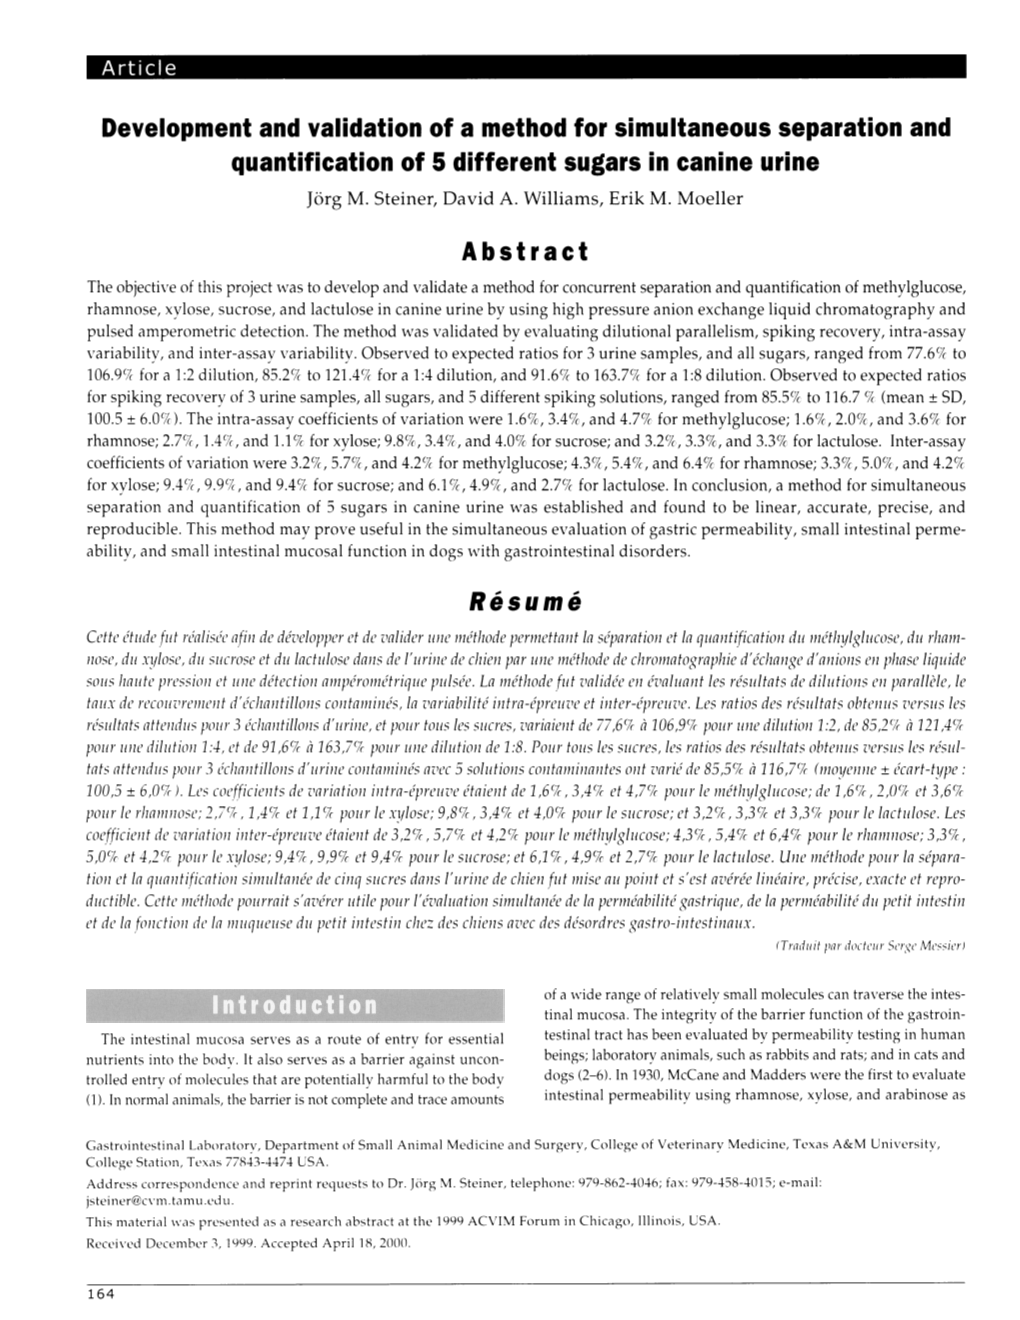 Development and Validation of a Method for Simultaneous Separation and Quantification of 5 Different Sugars in Canine Urine Jorg M